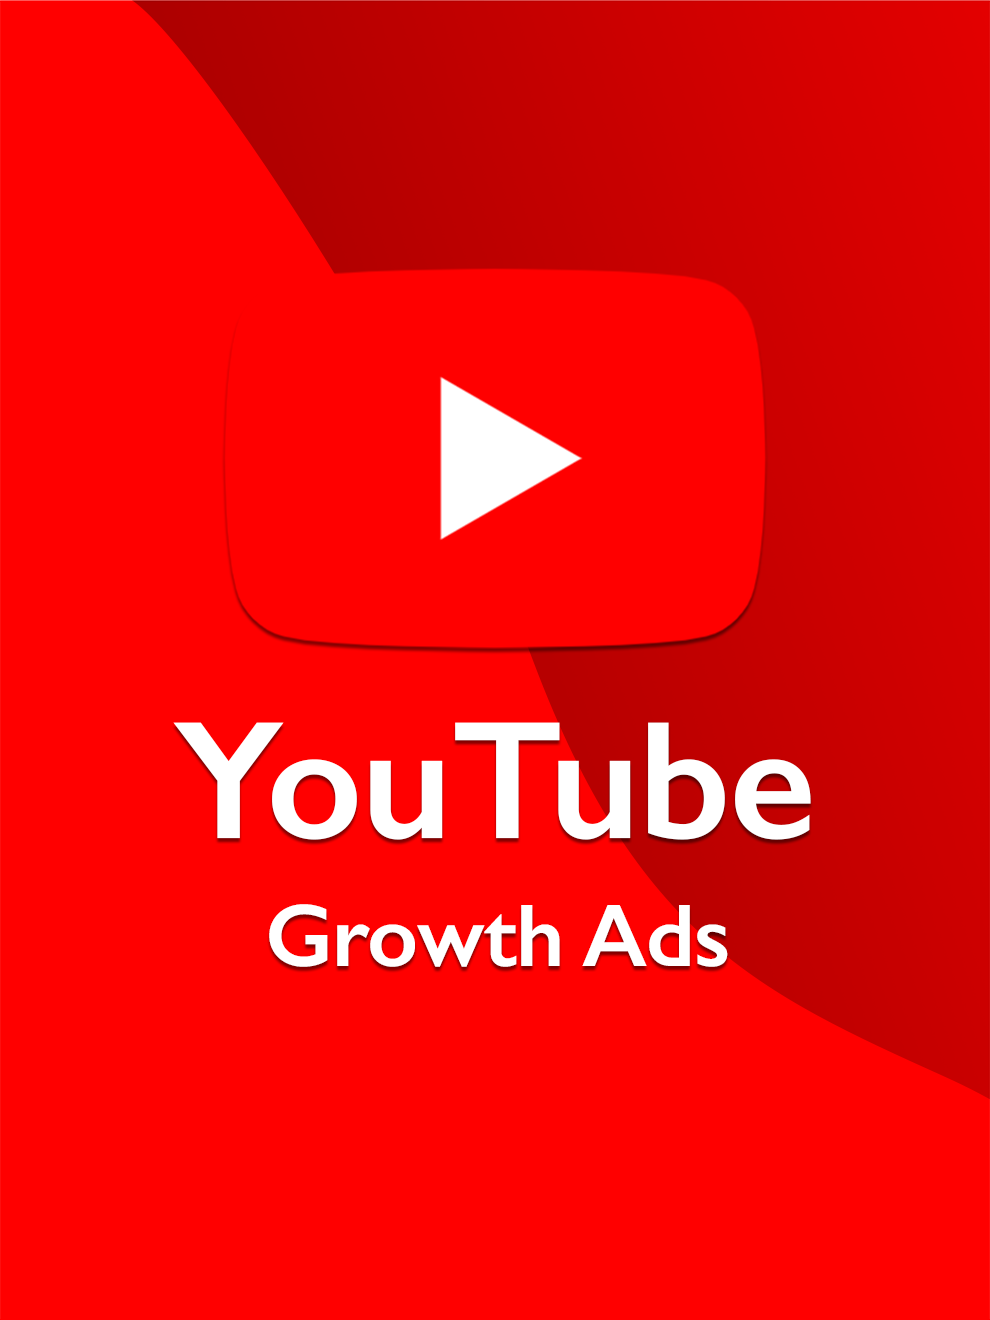 YouTube Growth Ads